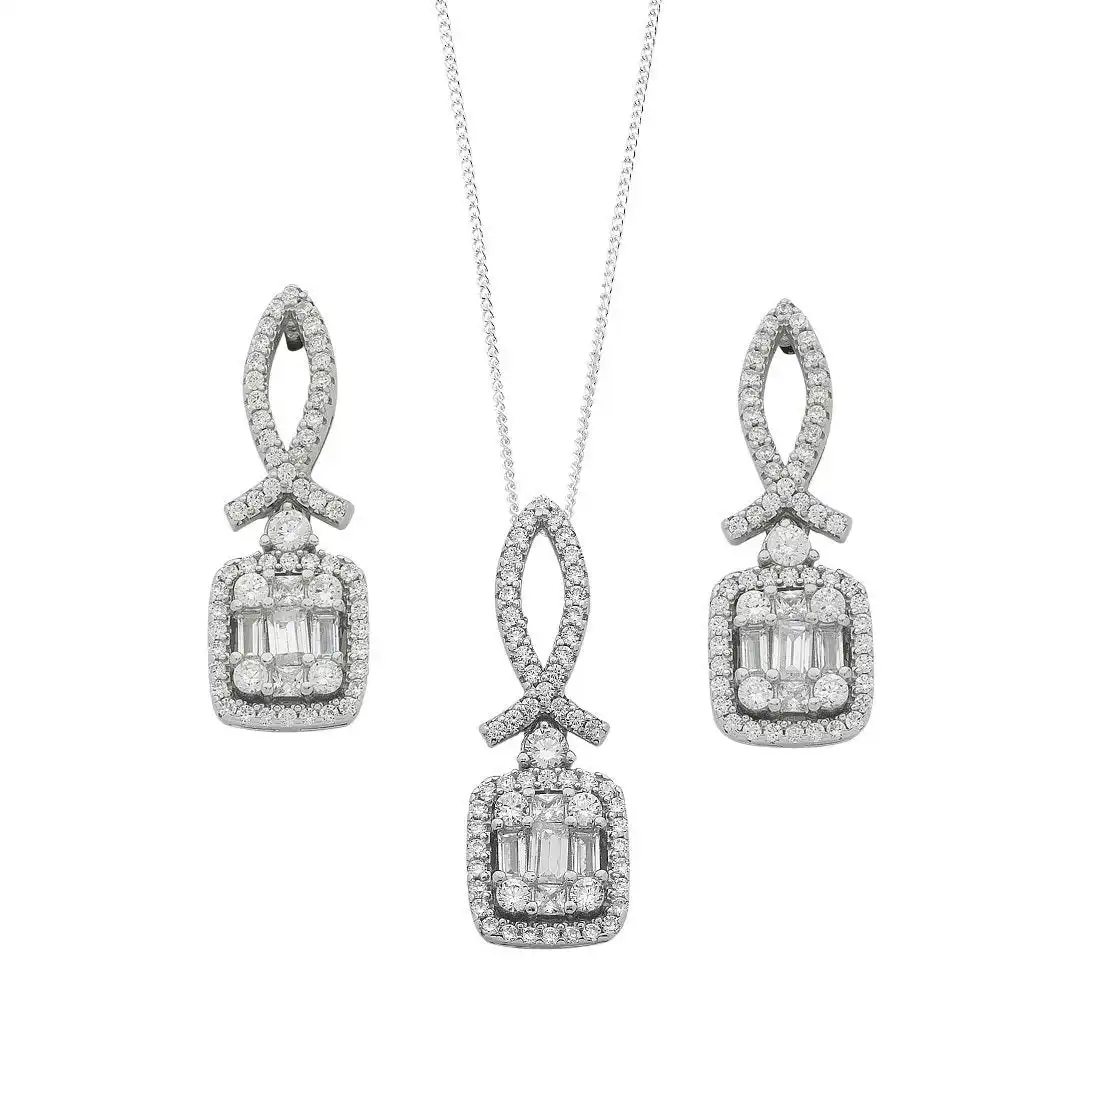 Sterling Silver Baguette Cubic Zirconia Cluster Earrings and Necklace Set